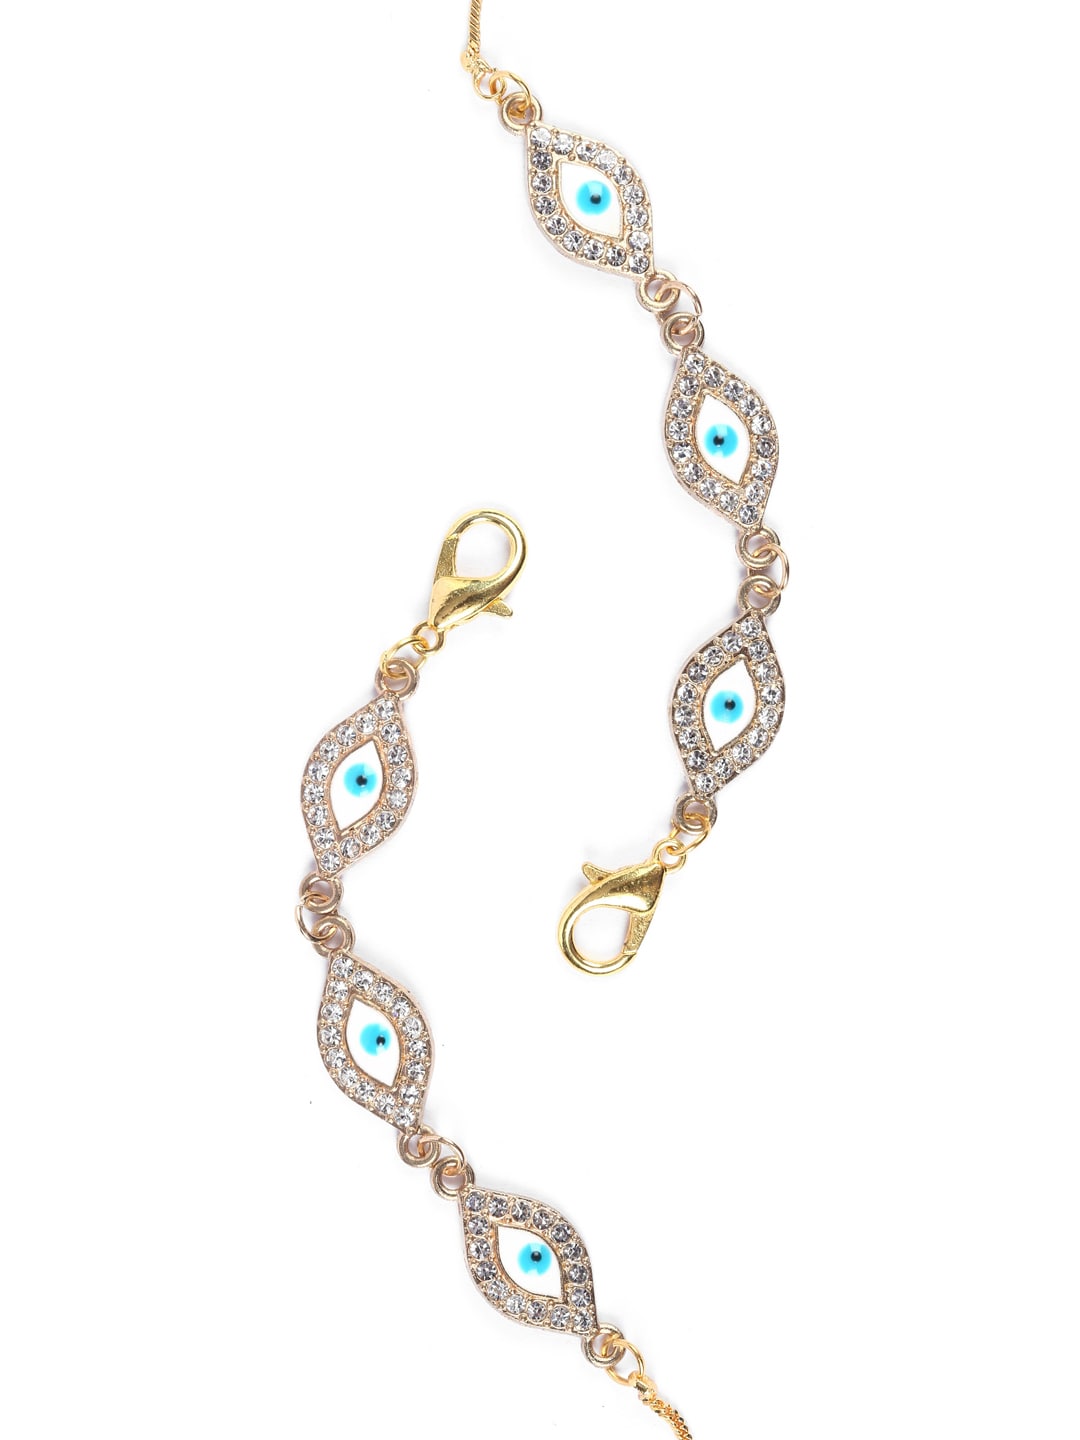 EL REGALO Women Gold-Toned & White Stone-Studded Mask Chains - for Women and Girls
Style ID: 17223070